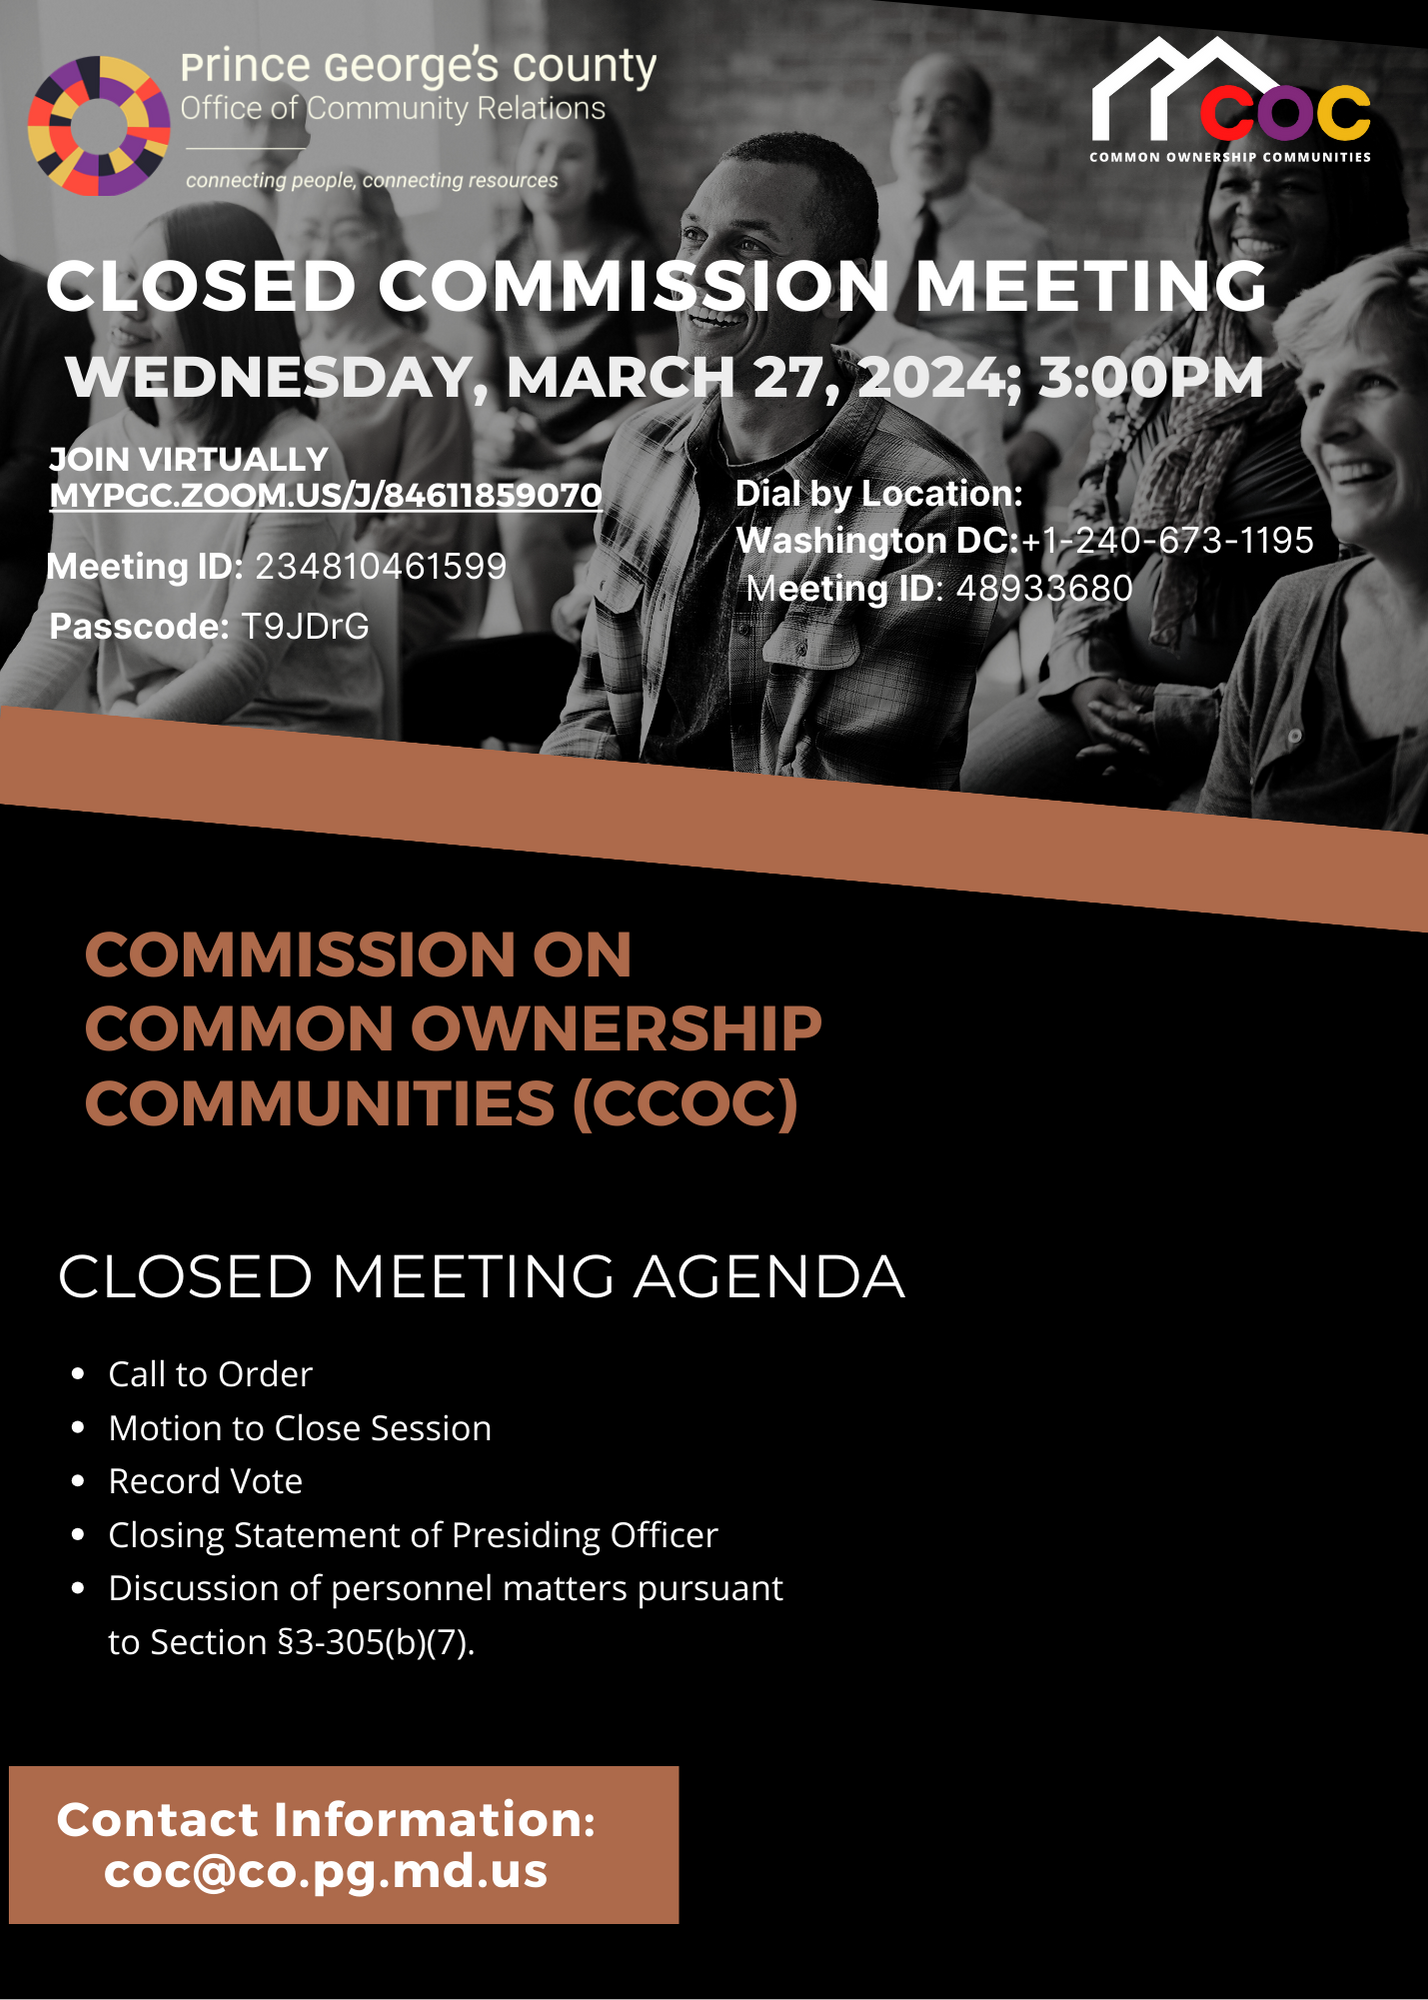 The Commission on Common Ownership Communities will be having a closed meeting tomorrow Wednesday March 27th at 3pm. 